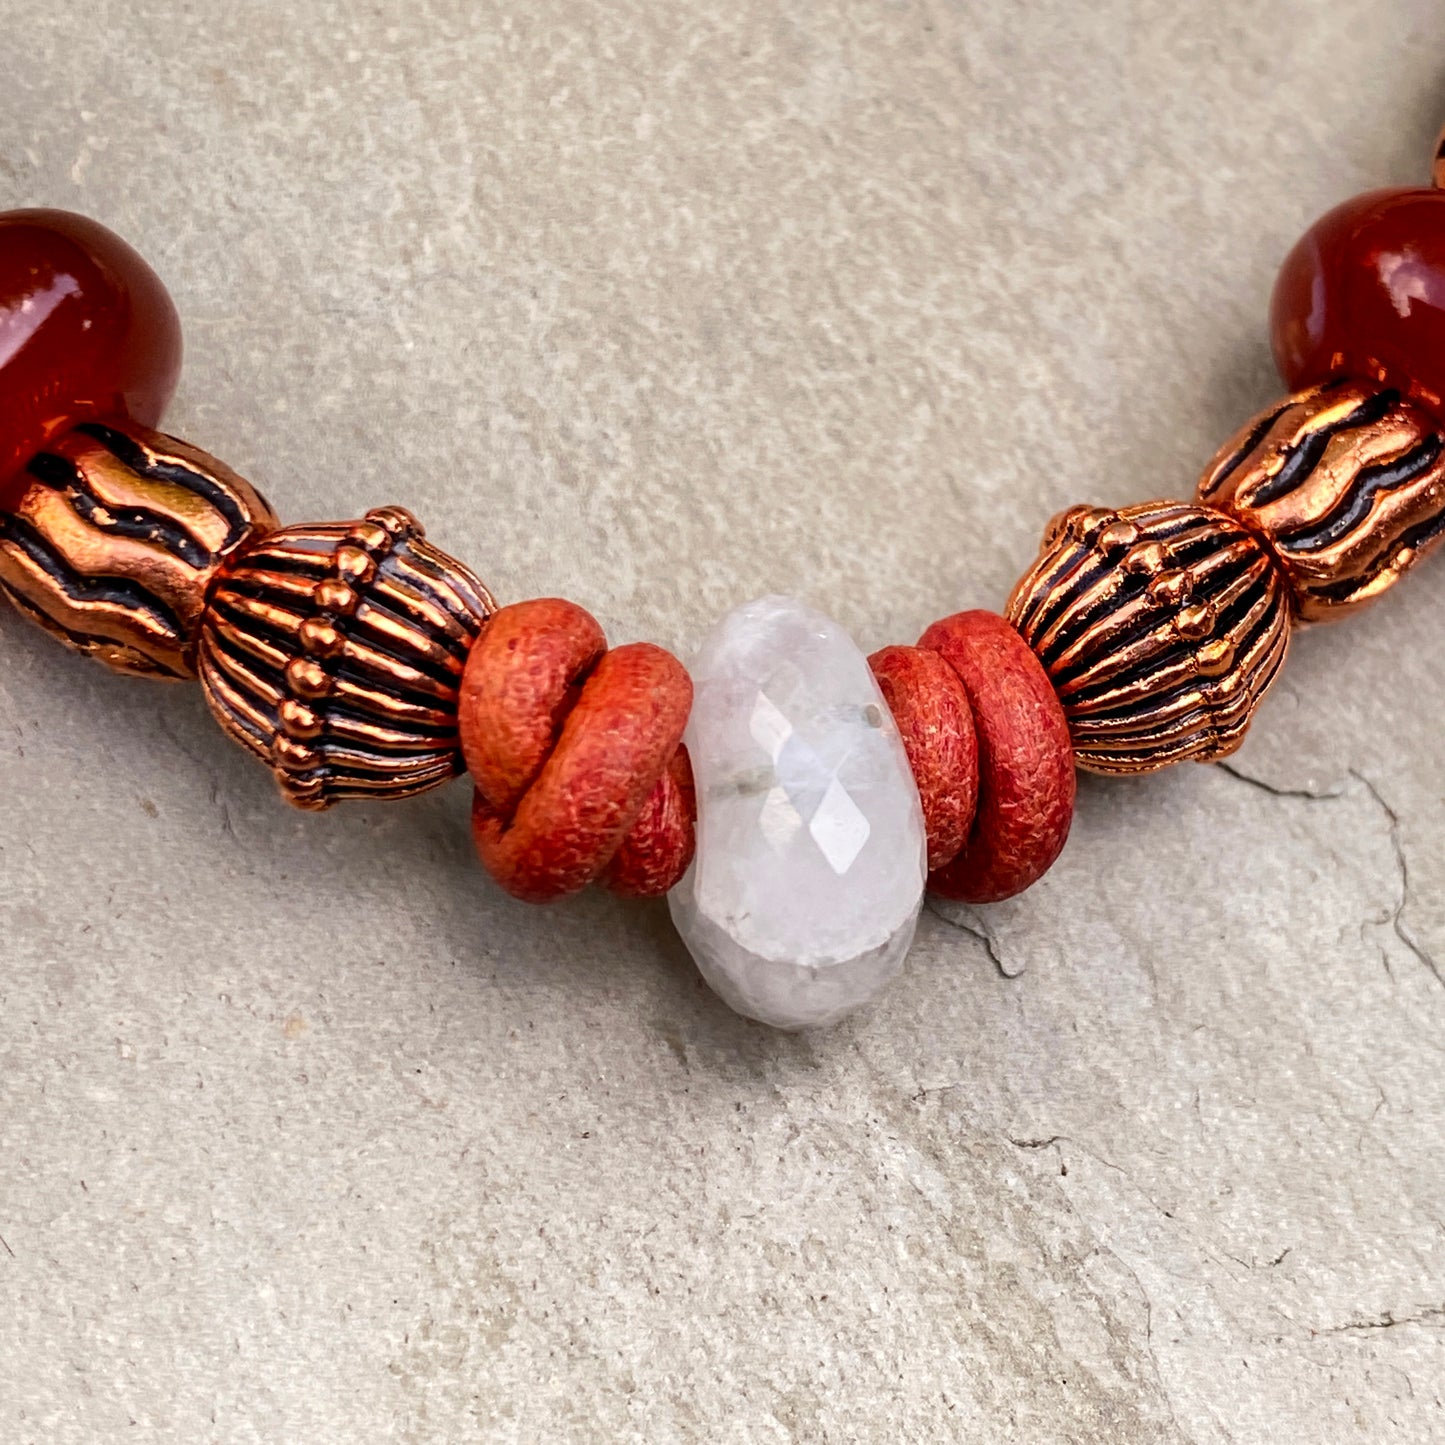 Moonstone gemstone with Red Agate and Copper on Red Leather clasp Bracelet